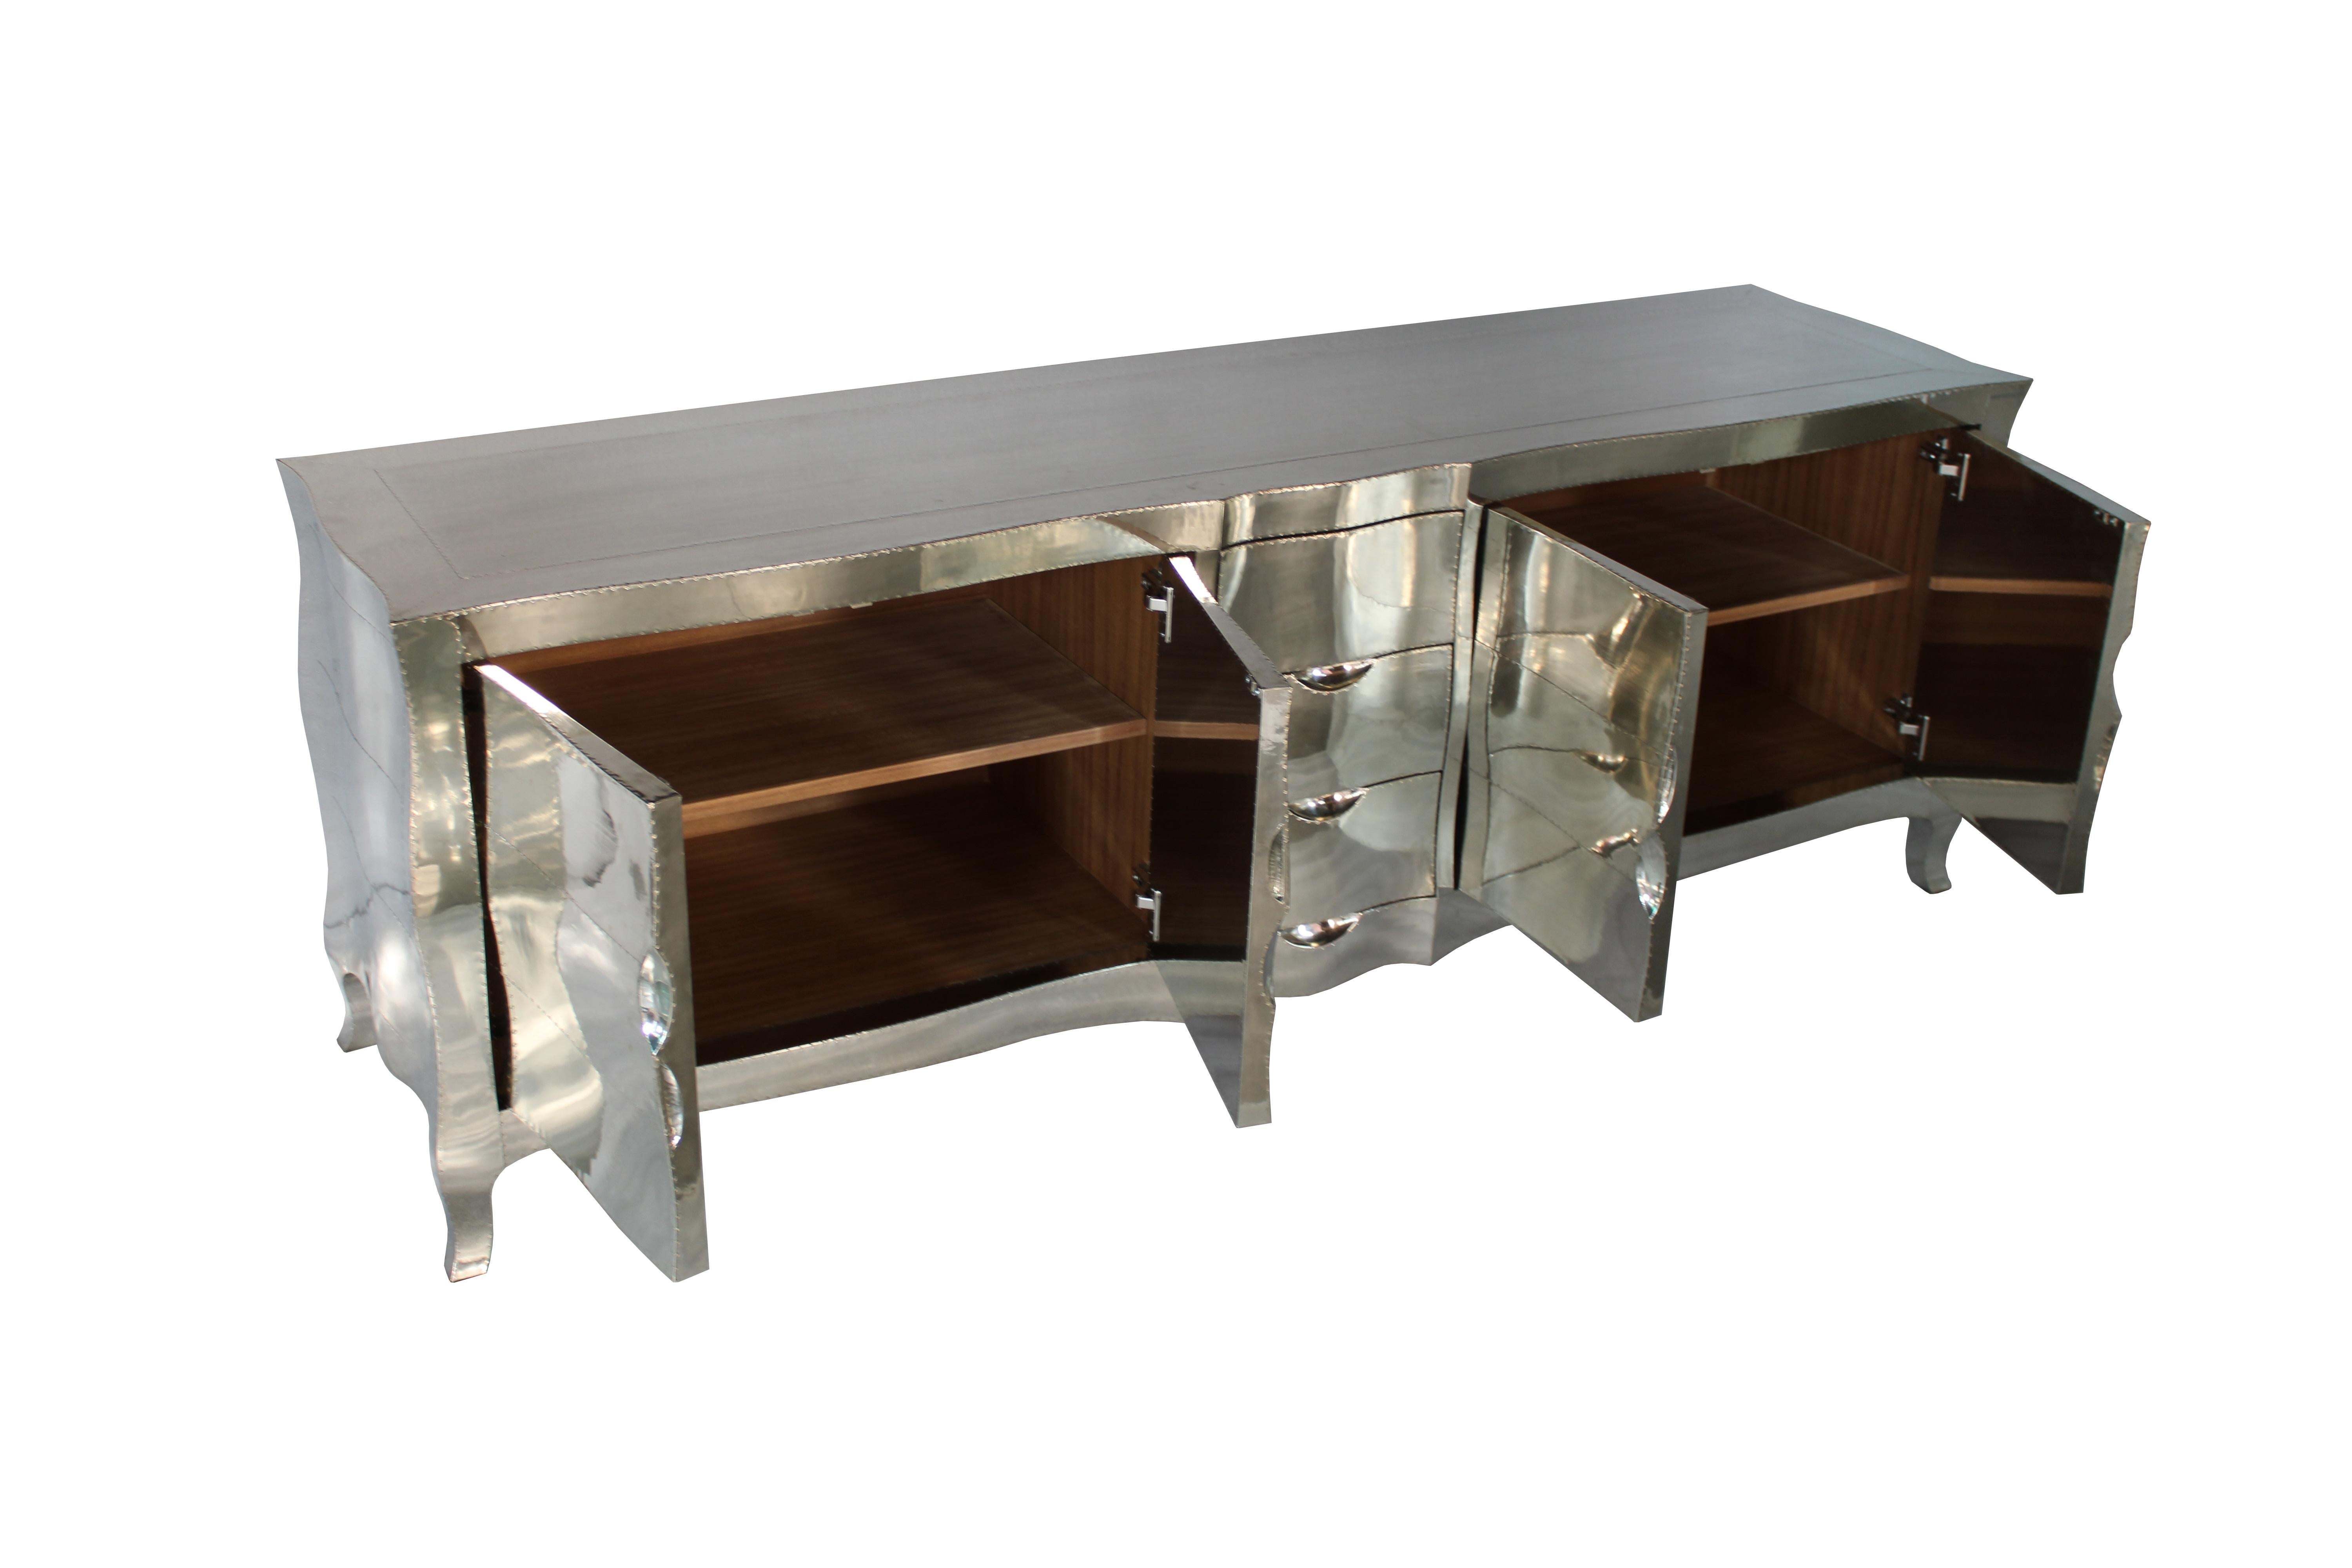 Louise Credenza Art Deco Dressers in Mid. Hammered Copper by Paul Mathieu For Sale 6